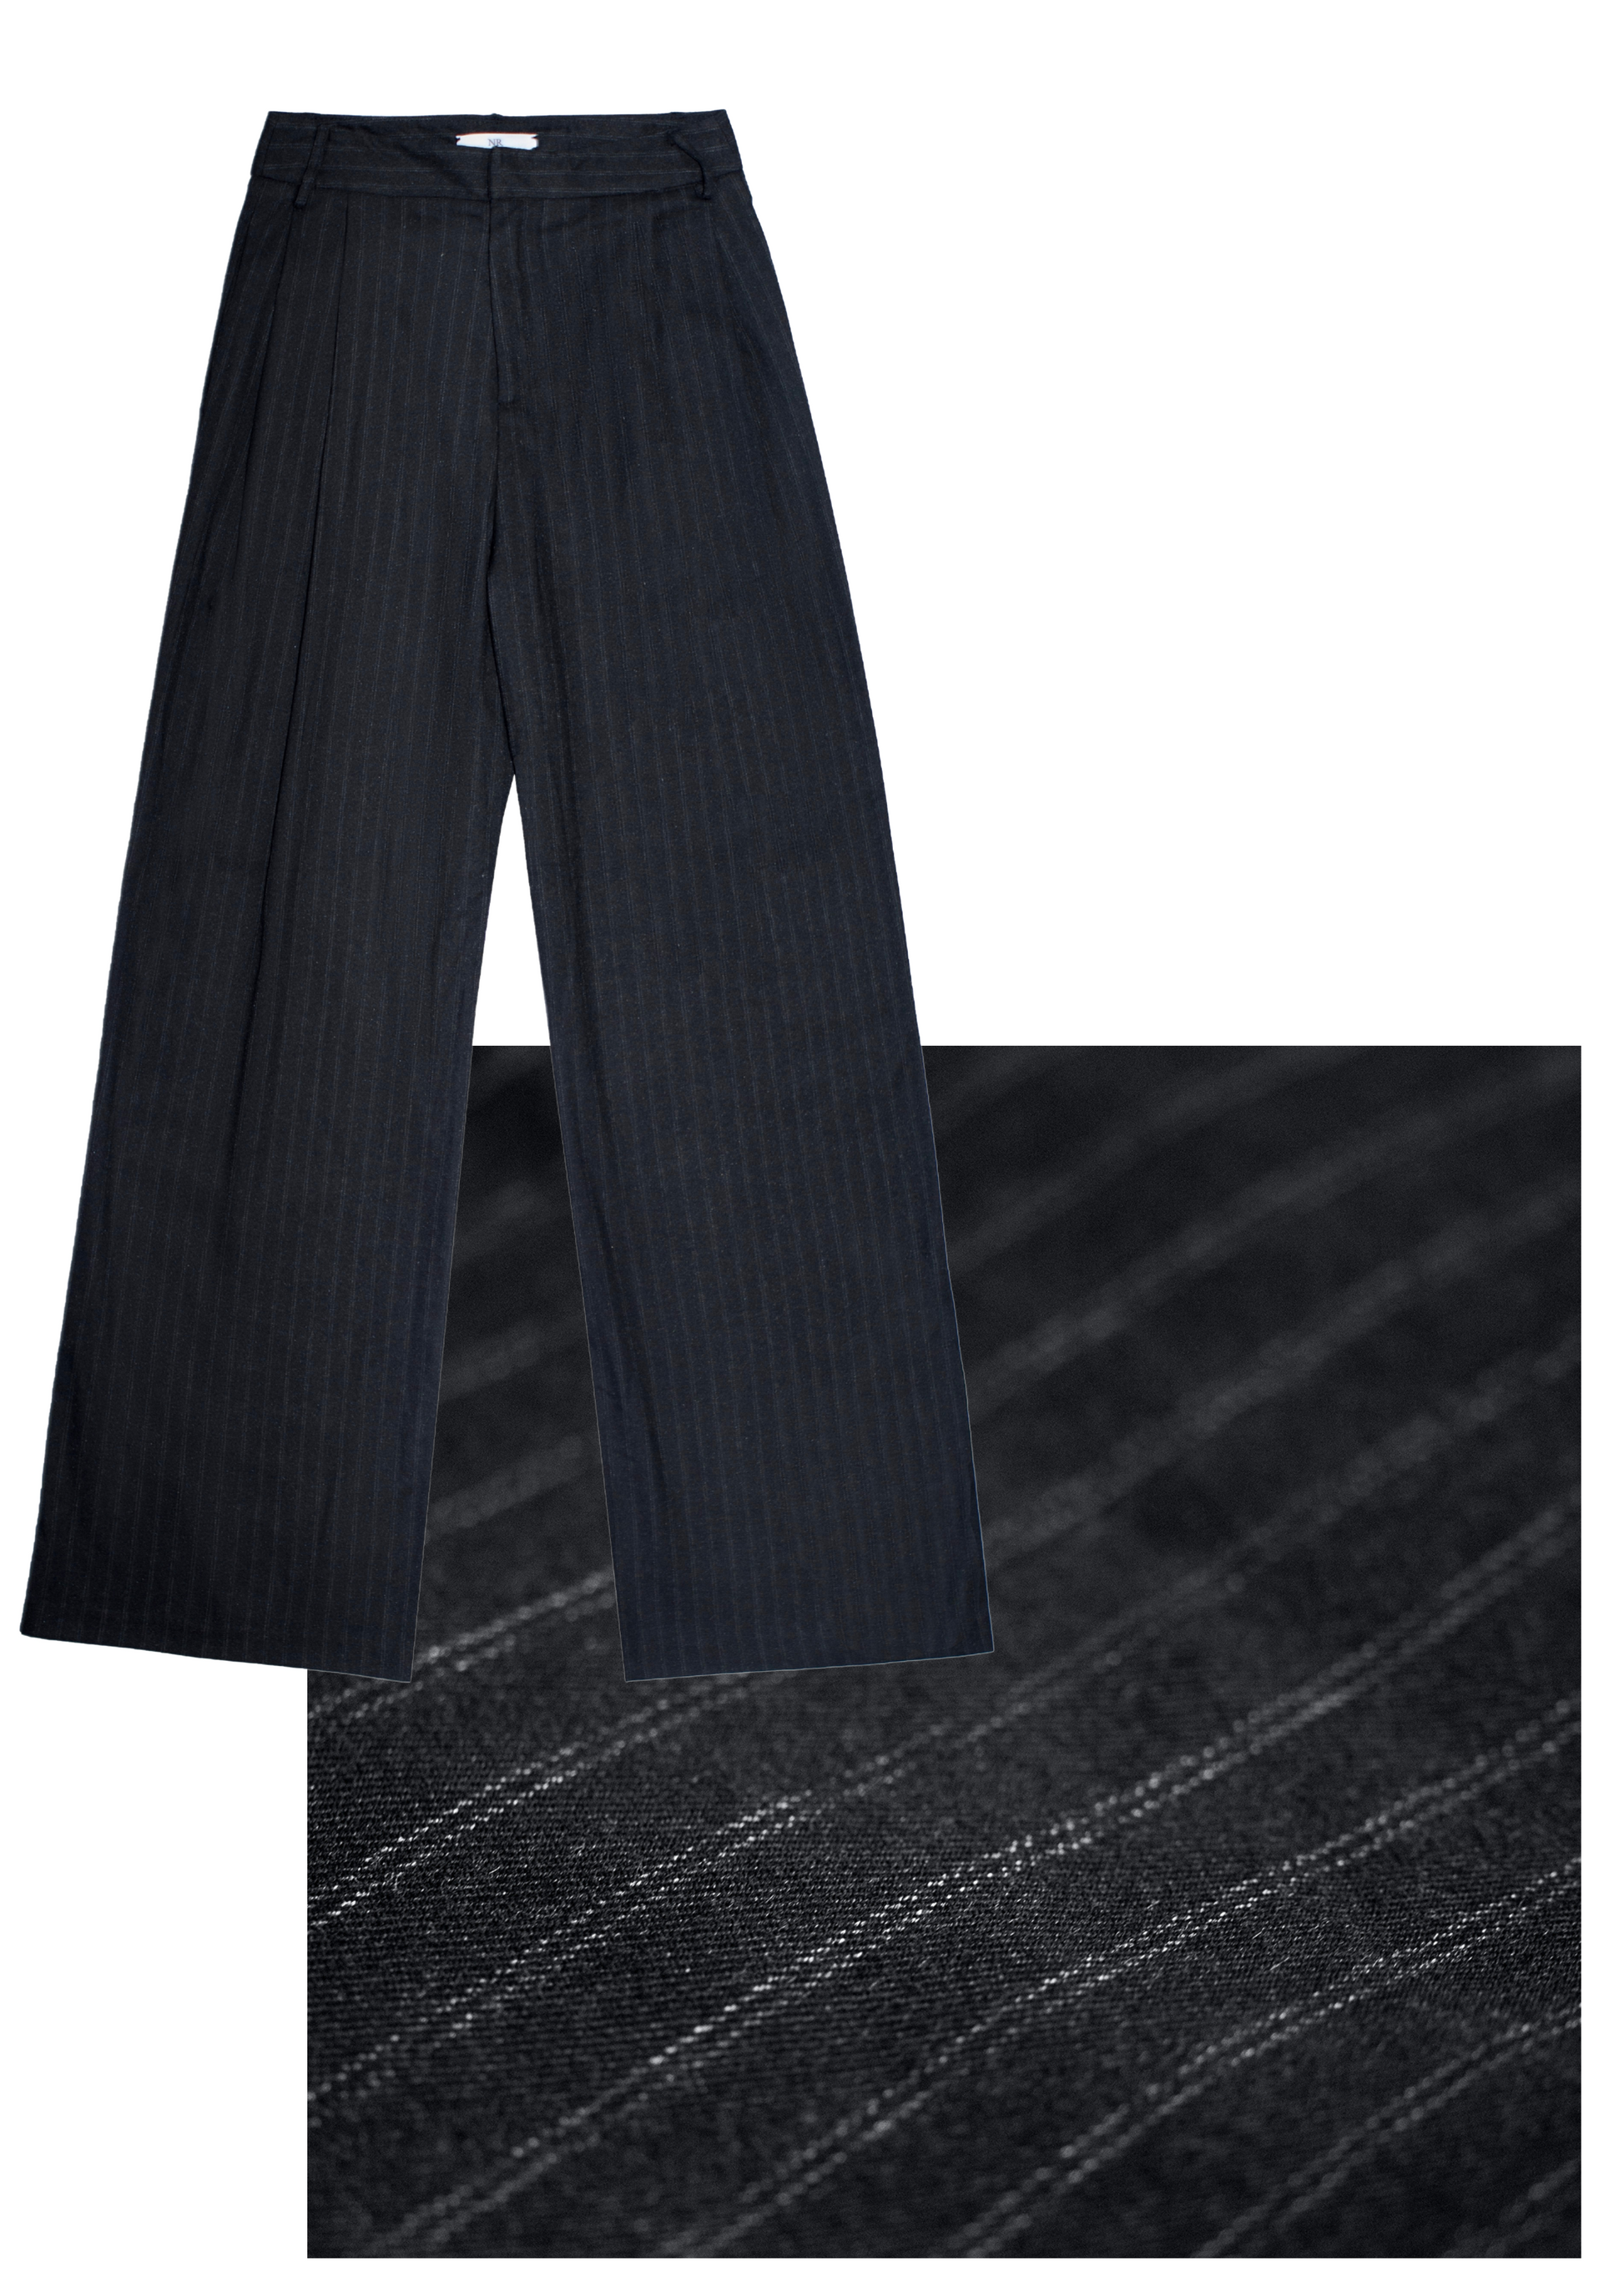 High-waisted striped trousers, Striped pants, Women's fashion, your lookbook, slow fashion,Chic trousers,Fashionable pants, trendy bottoms, Versatile trousers, timeless style